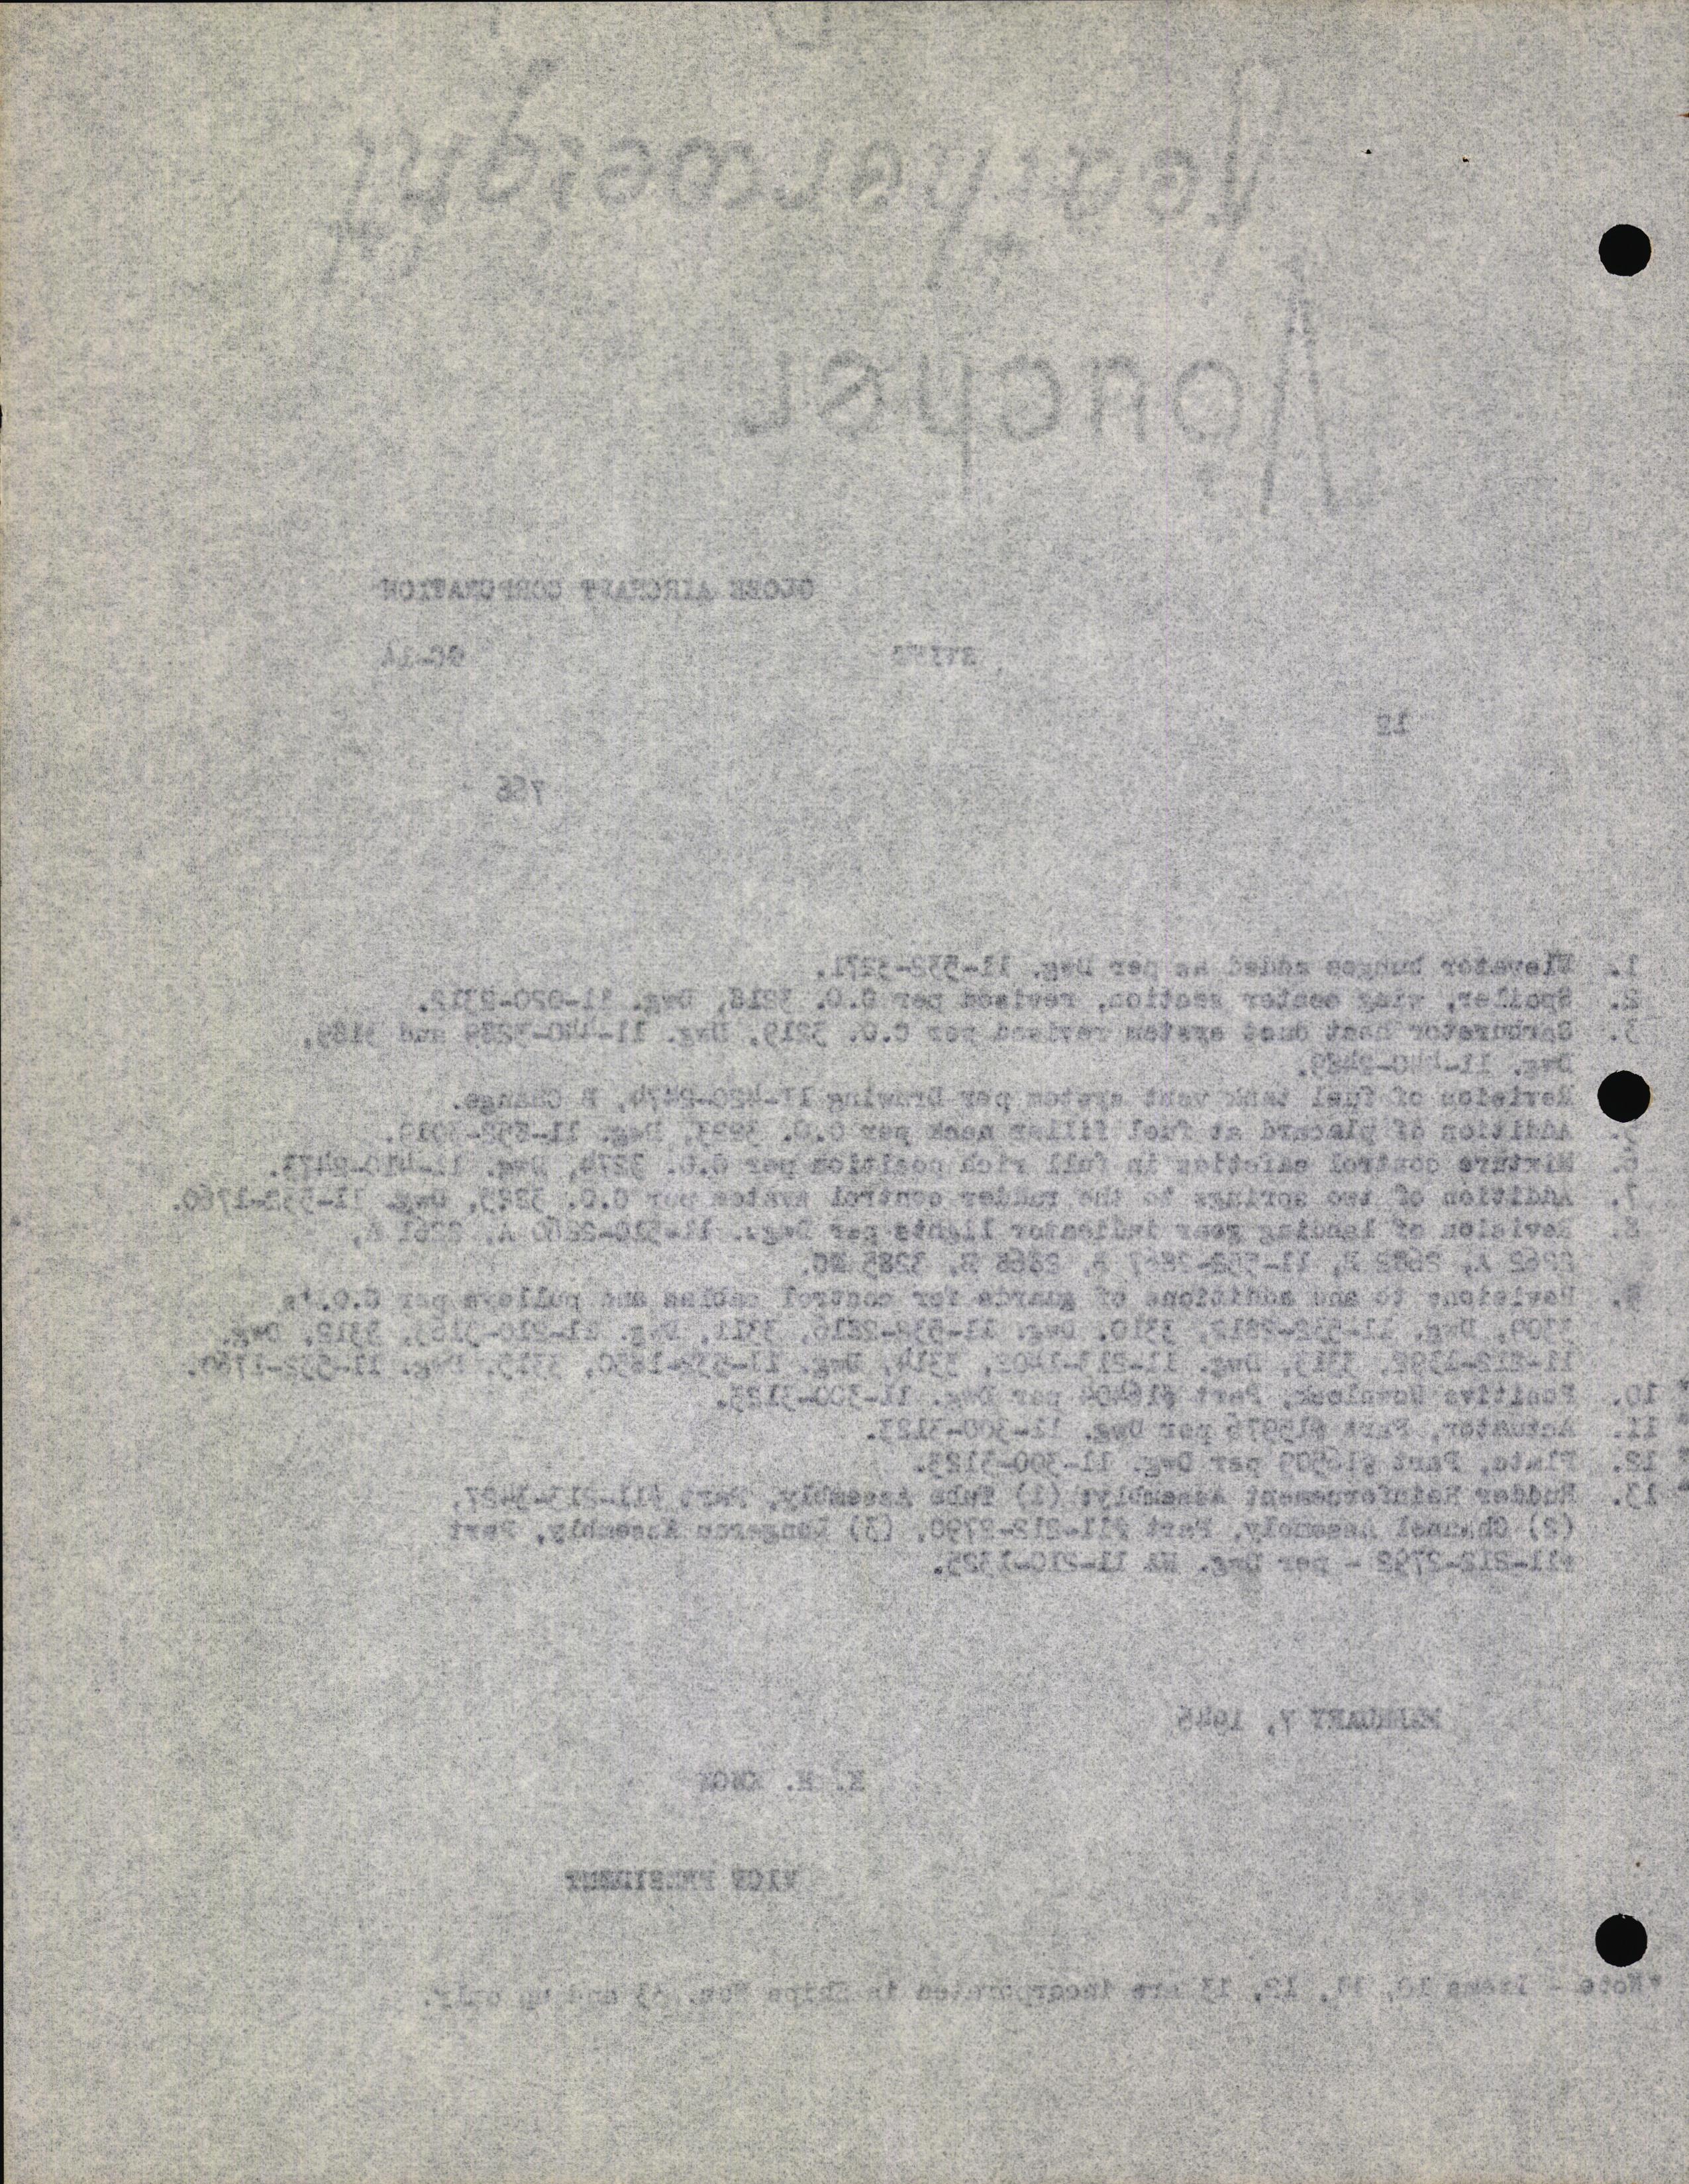 Sample page 6 from AirCorps Library document: Technical Information for Serial Number 12